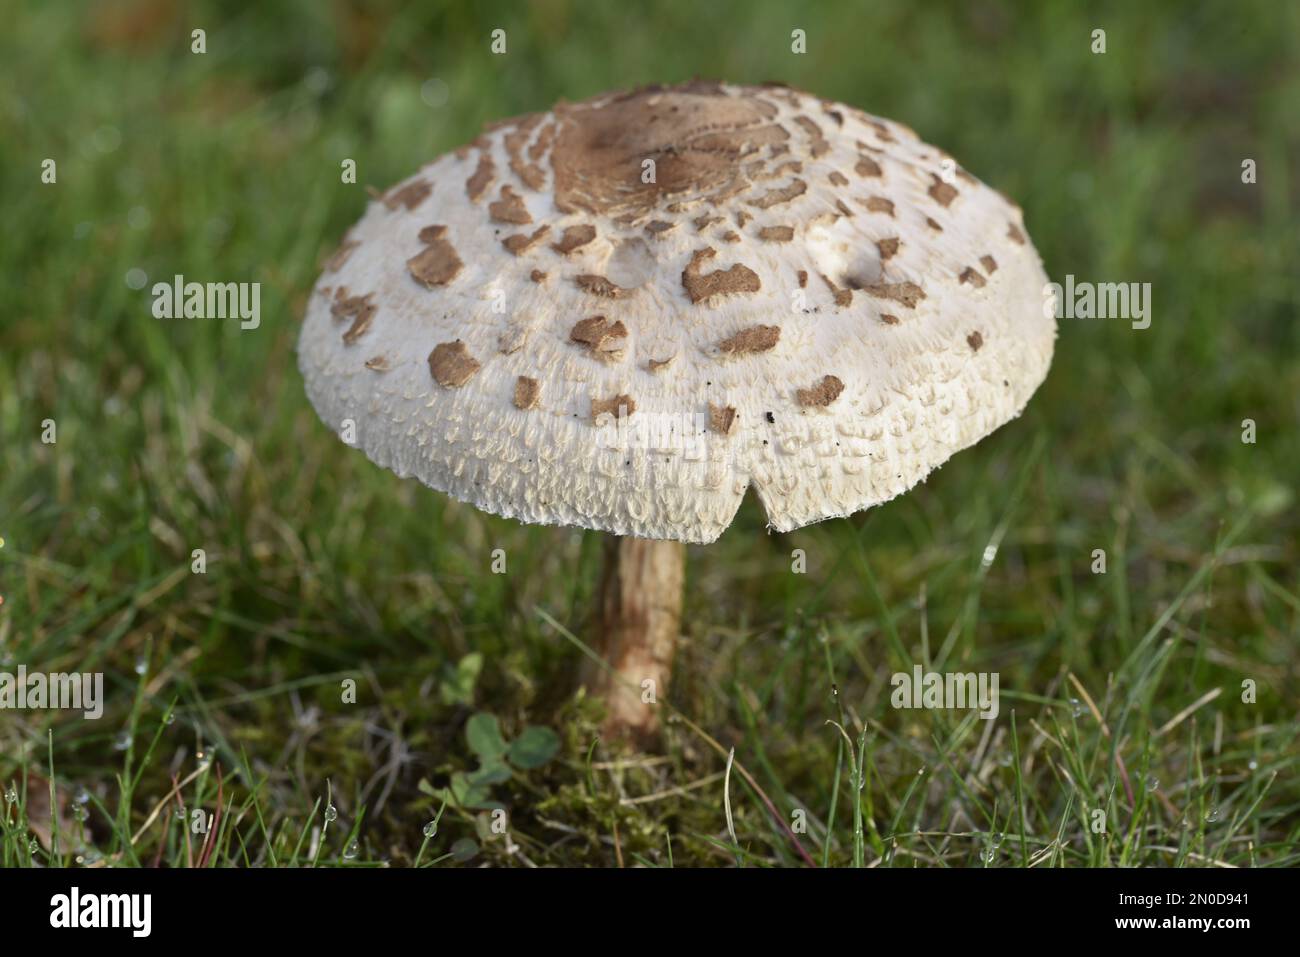 Close-Up Image of a Dapperling Parasol Mushroom on Green Grass in Natural Light, Taken in Wales, UK in October Stock Photo